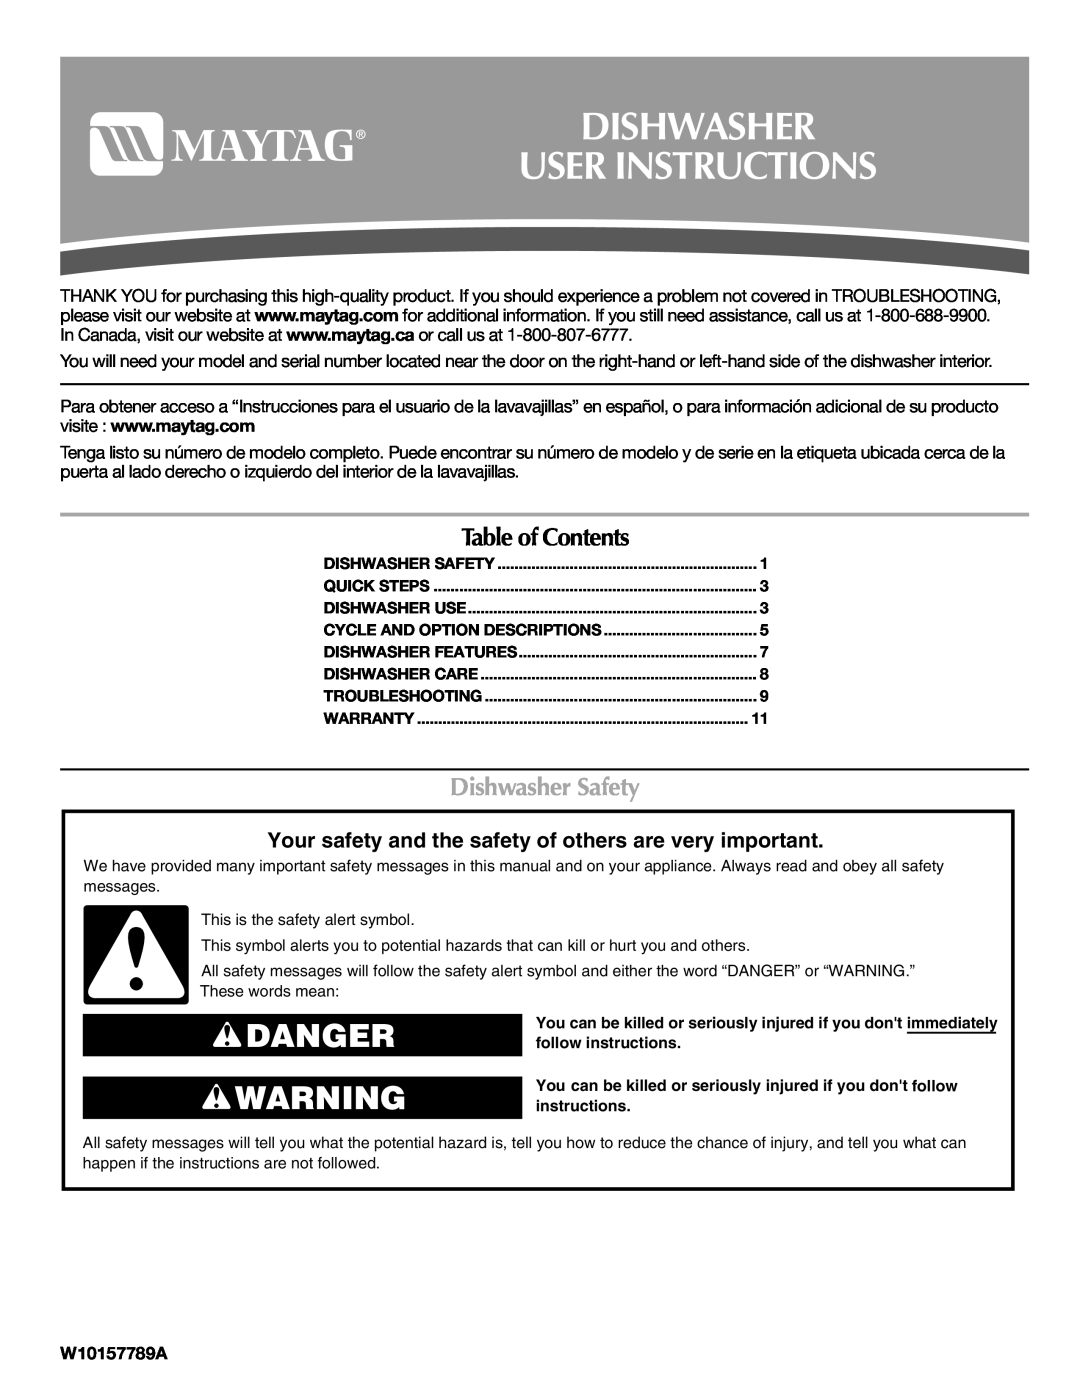 Maytag W10157789A warranty Dishwasher User Instructions, Danger, Table of Contents, Dishwasher Safety 